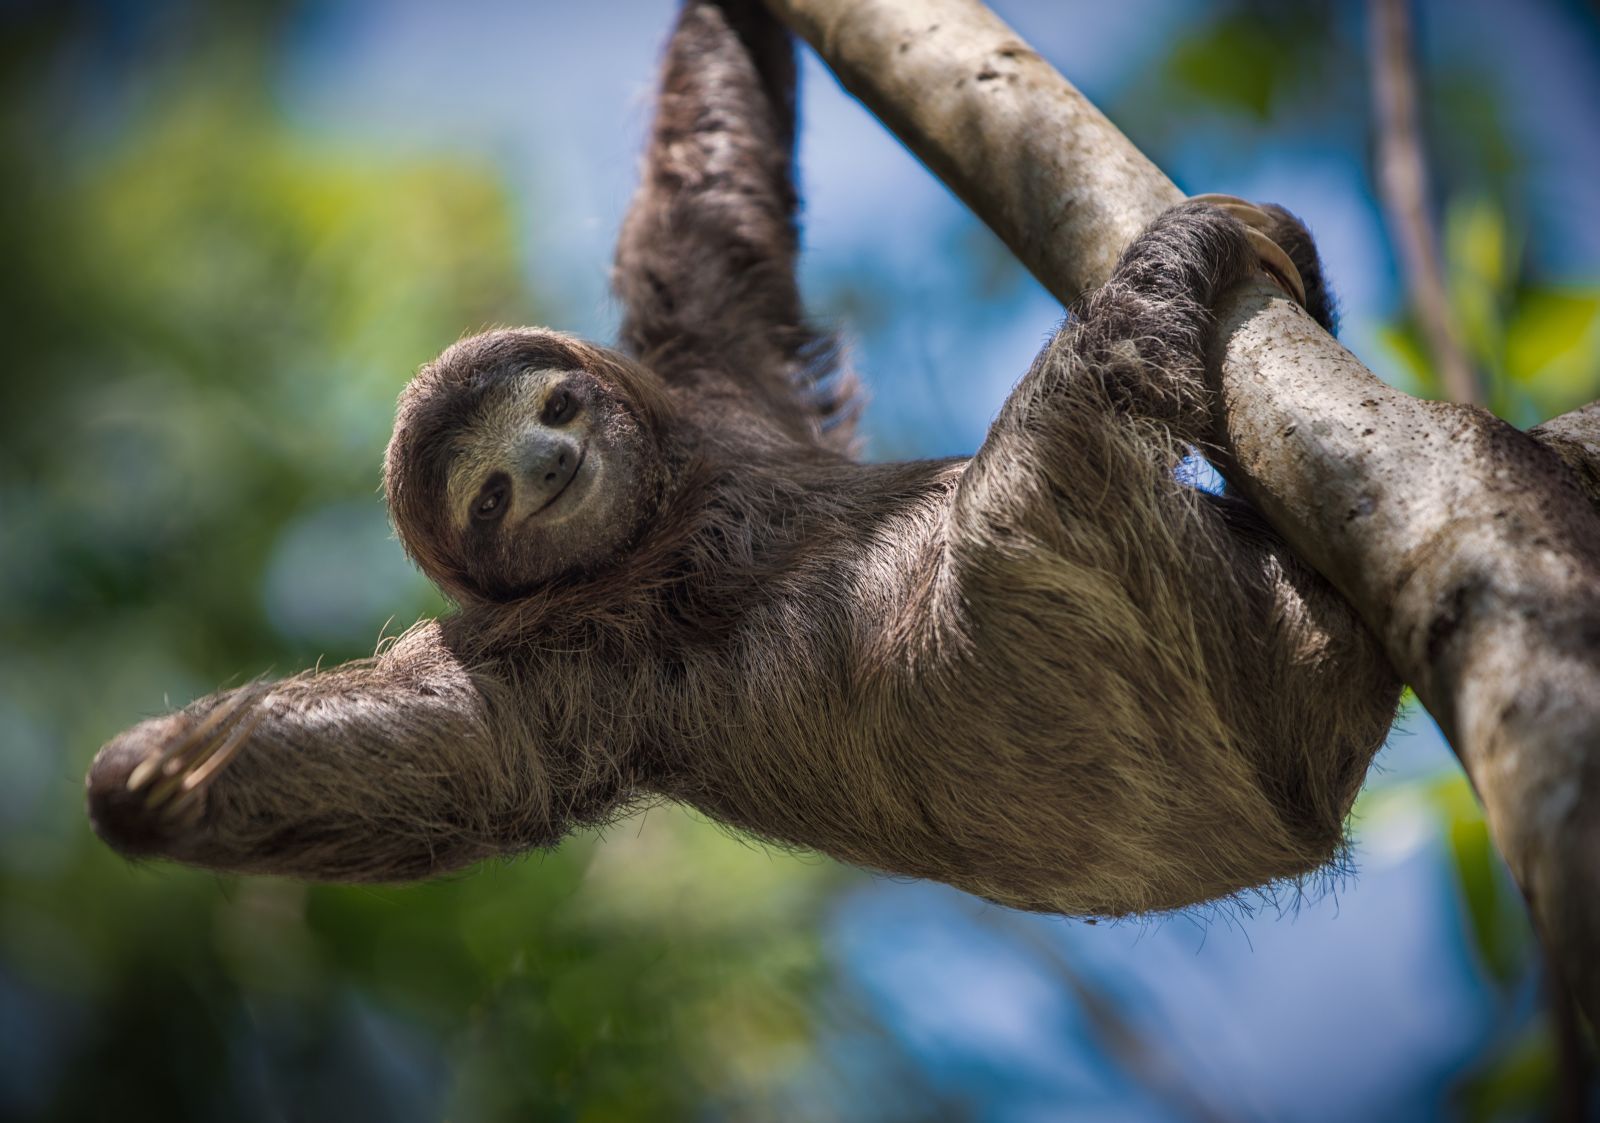 a sloth seen in central america